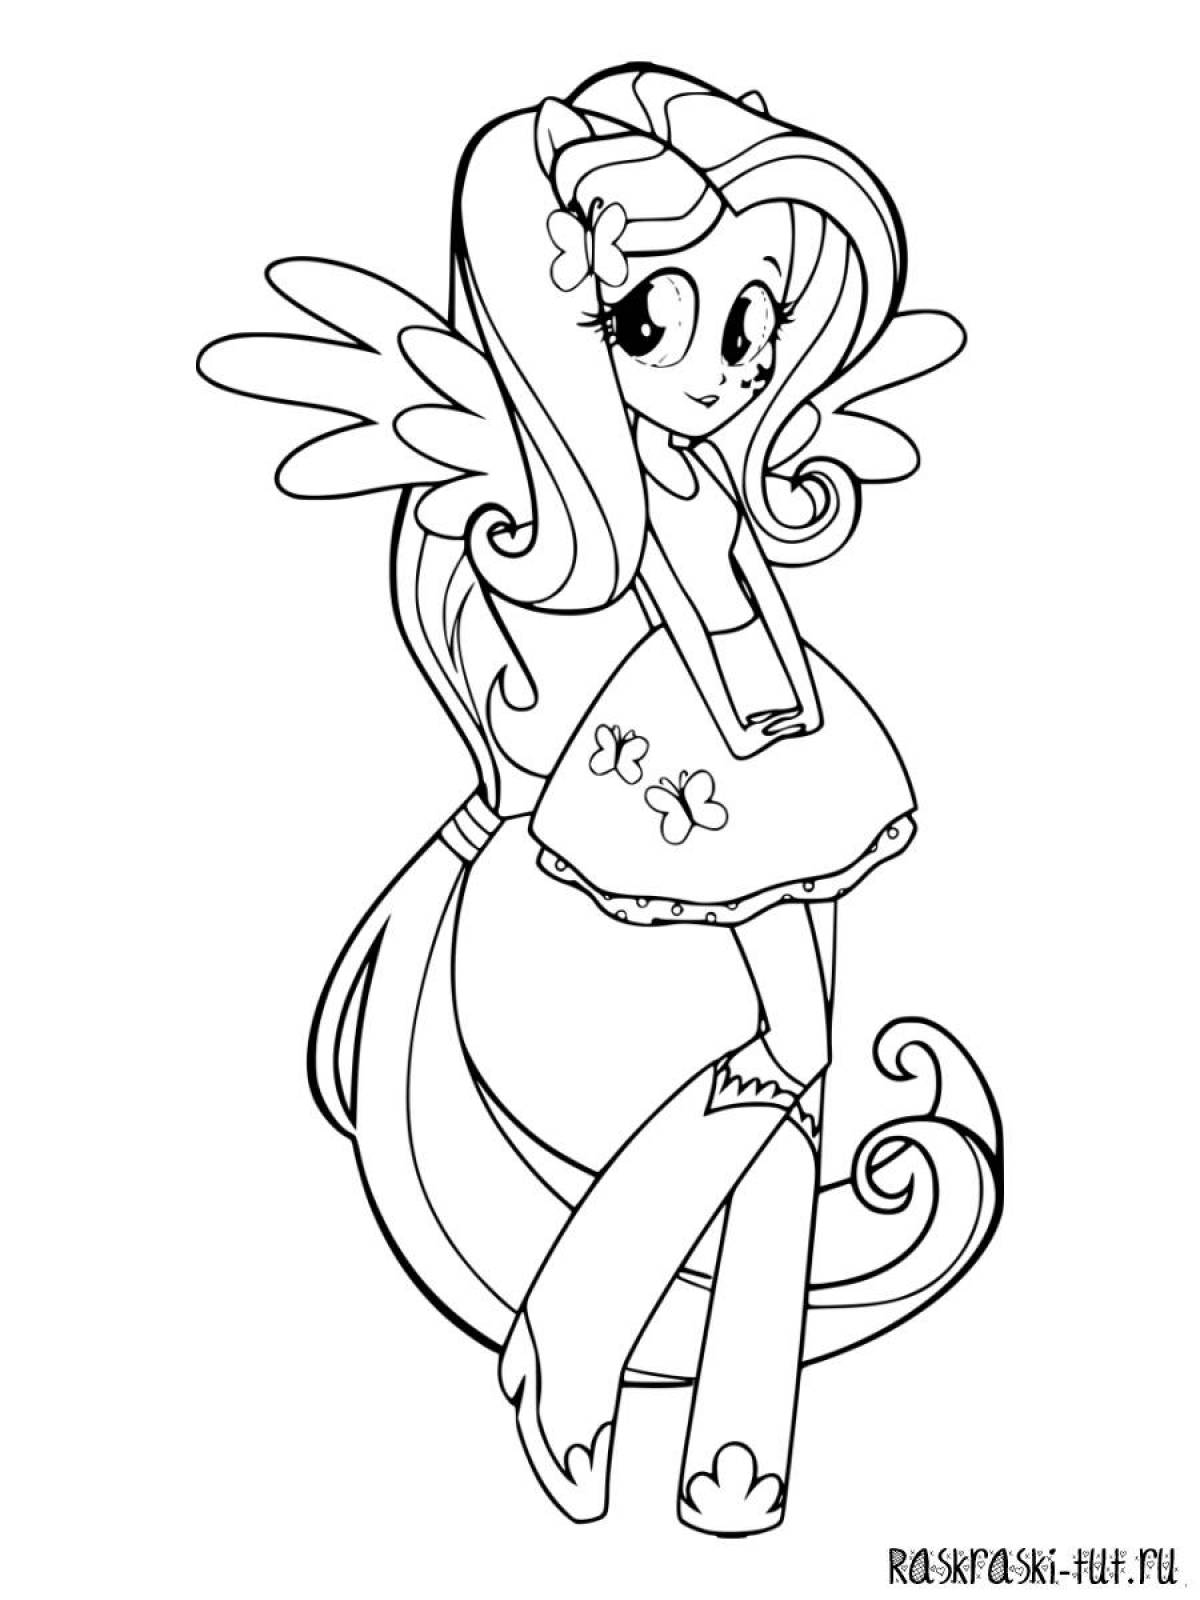 Playful fluttershy coloring book